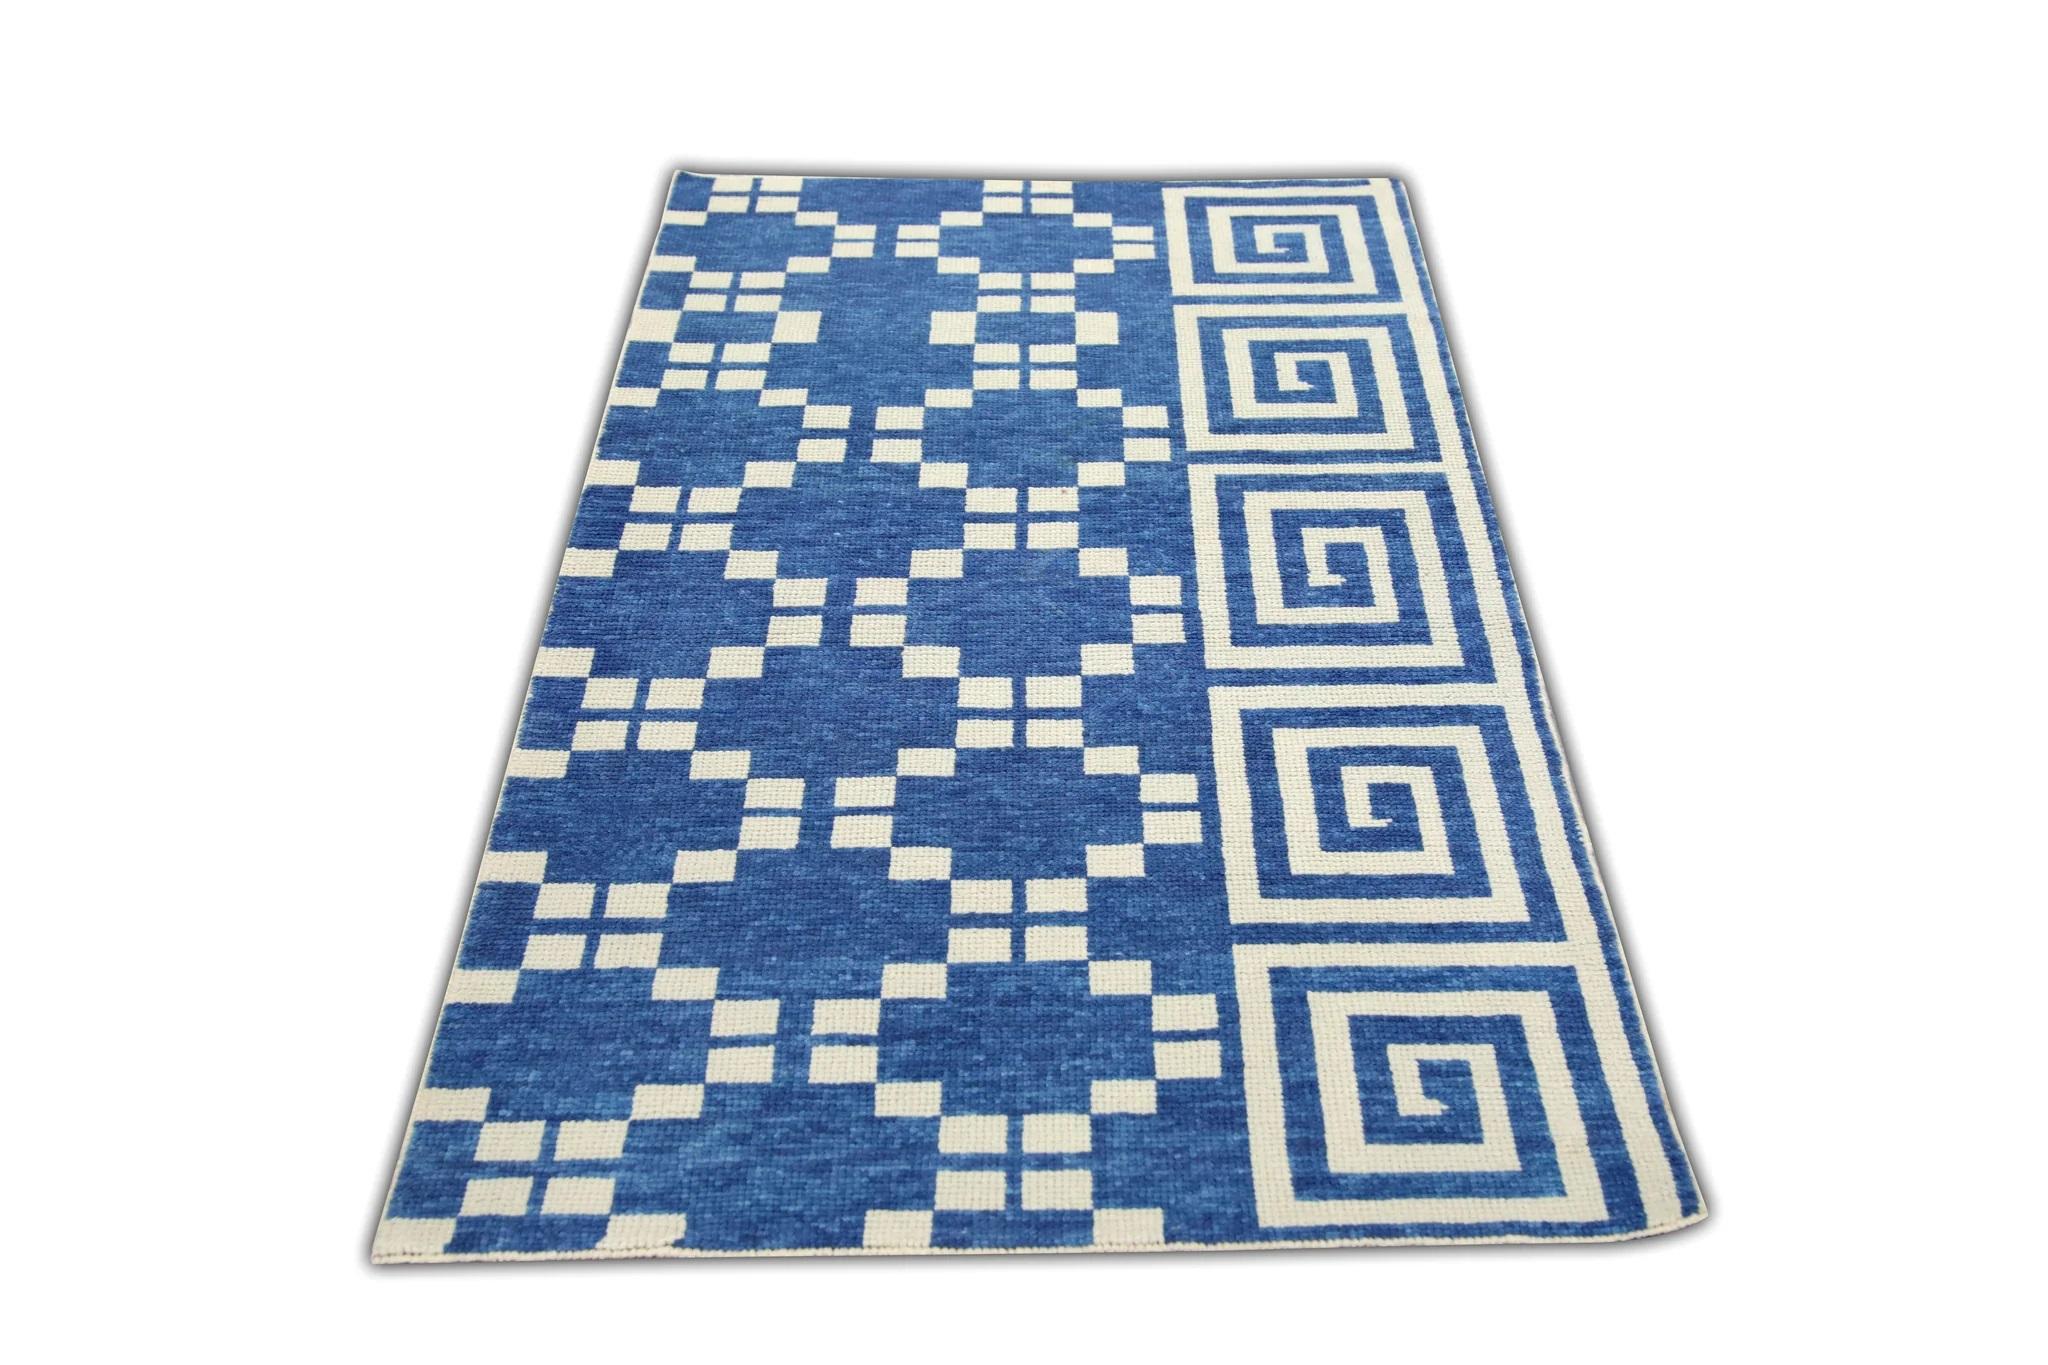 Contemporary Tribal Geometric Handwoven Turkish Oushak Rug in Blue and Cream 3' x 5'2